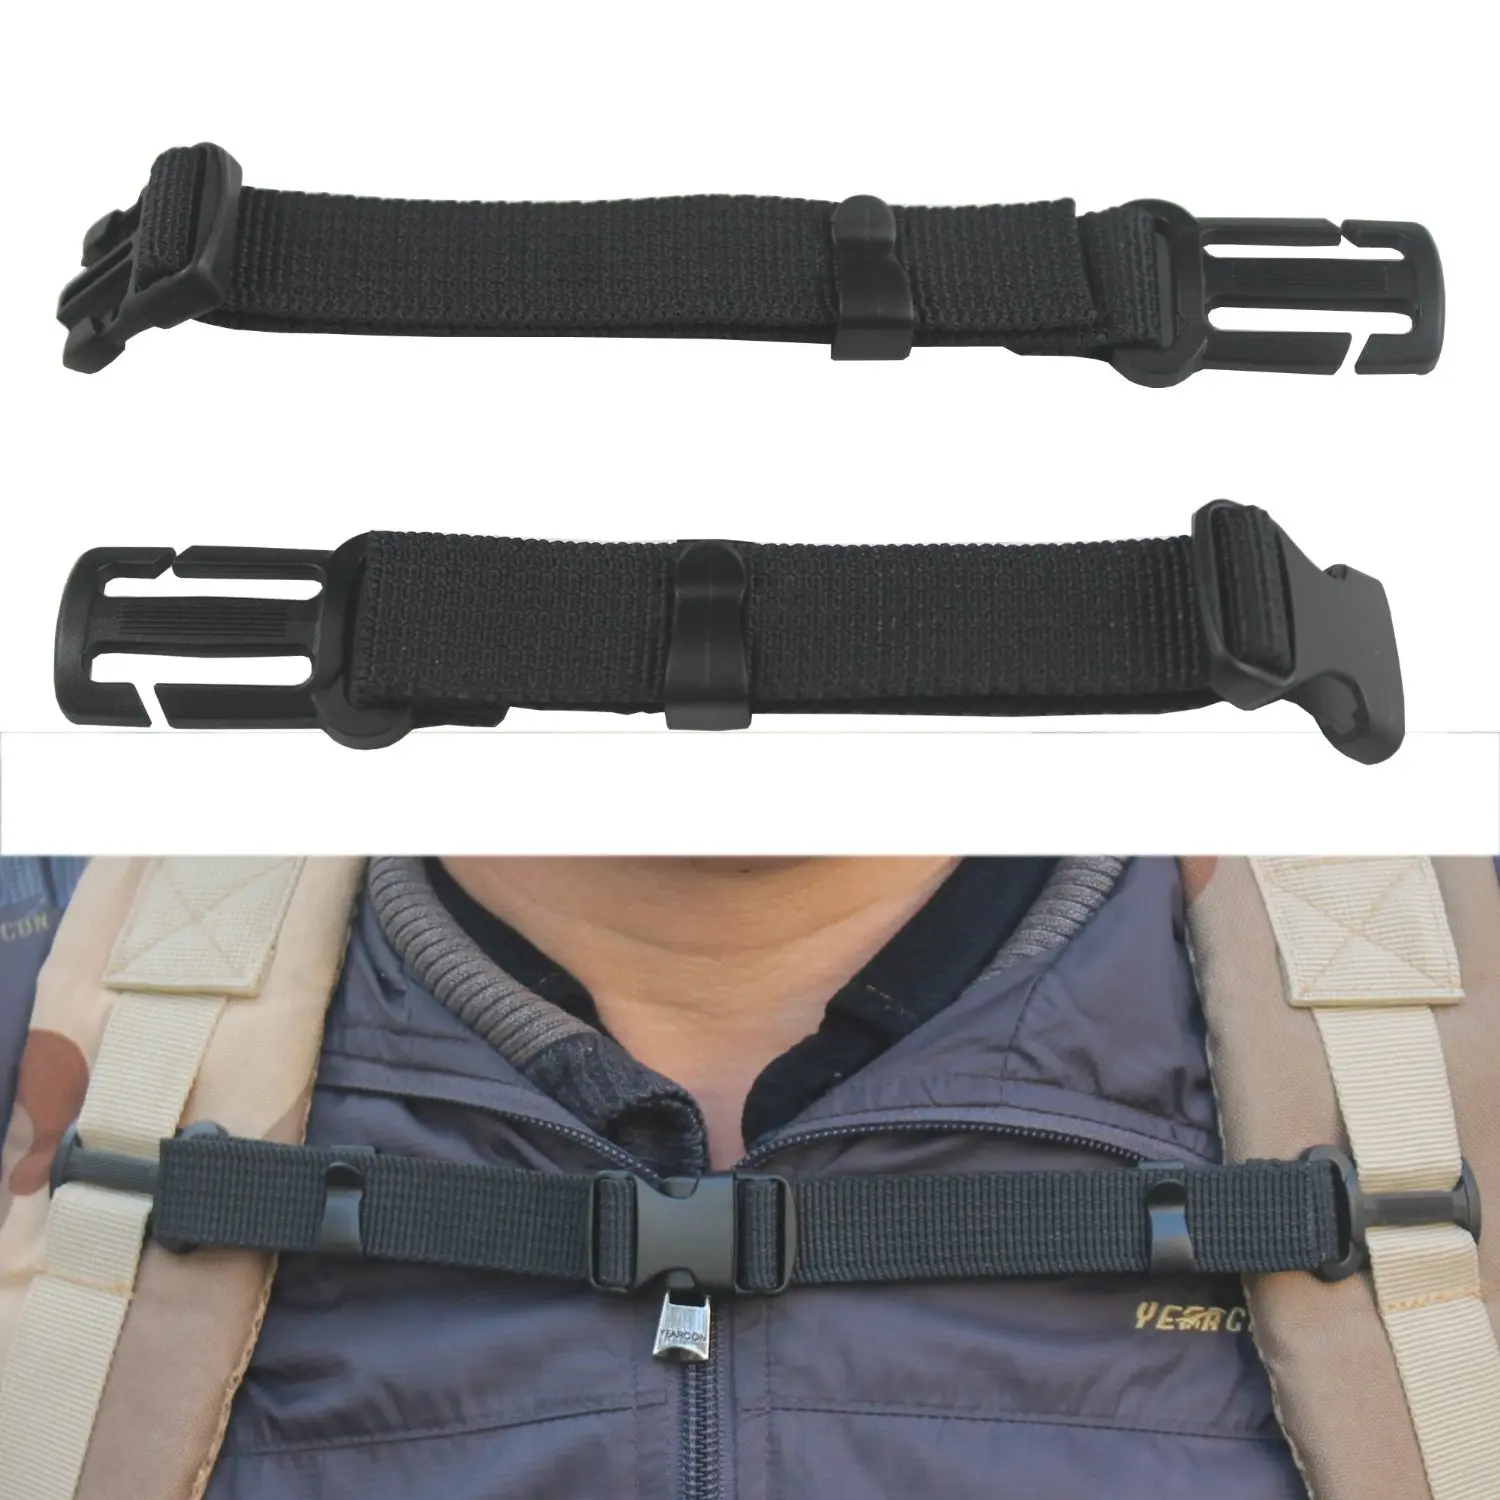 Nylon Chest sternum harness strap backpack camera bag US Made for 3/4" webbing